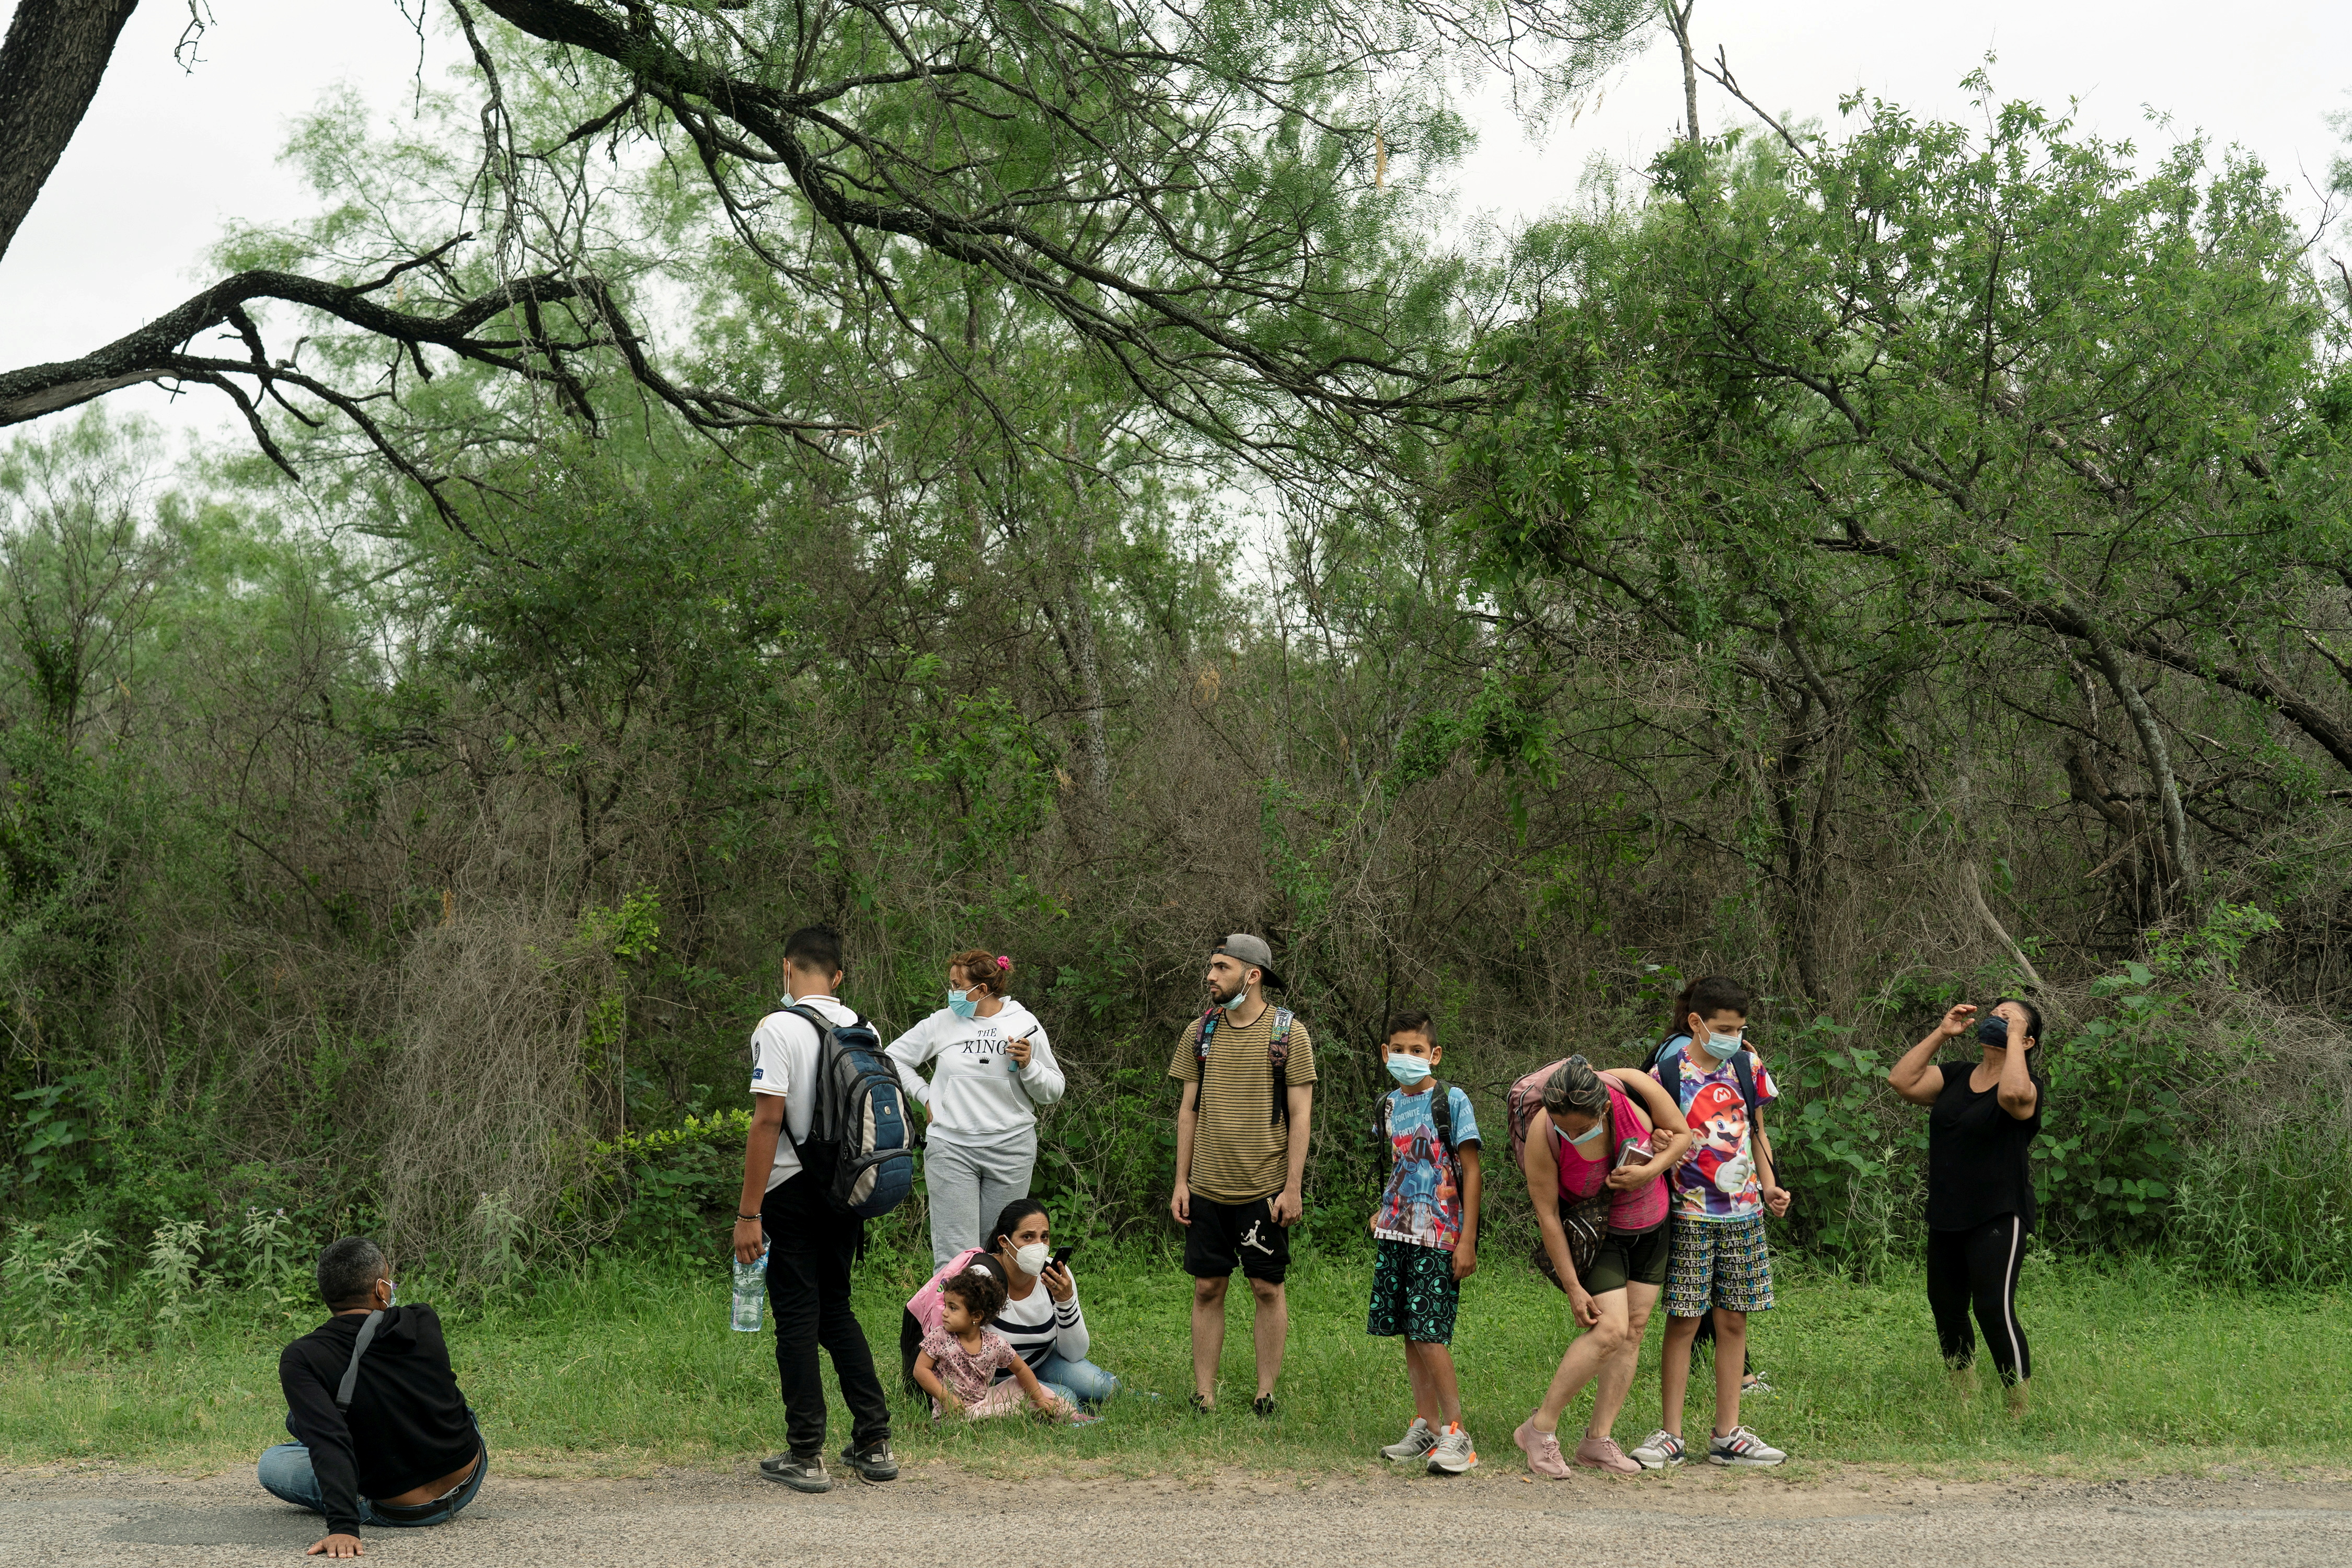 Asylum-seeking migrants' families from Venezuela wait to be transported by the U.S. Border Patrols after crossing the Rio Grande river into the United States from Mexico in Del Rio, Texas, U.S., May 27, 2021. REUTERS/Go Nakamura/File Photo